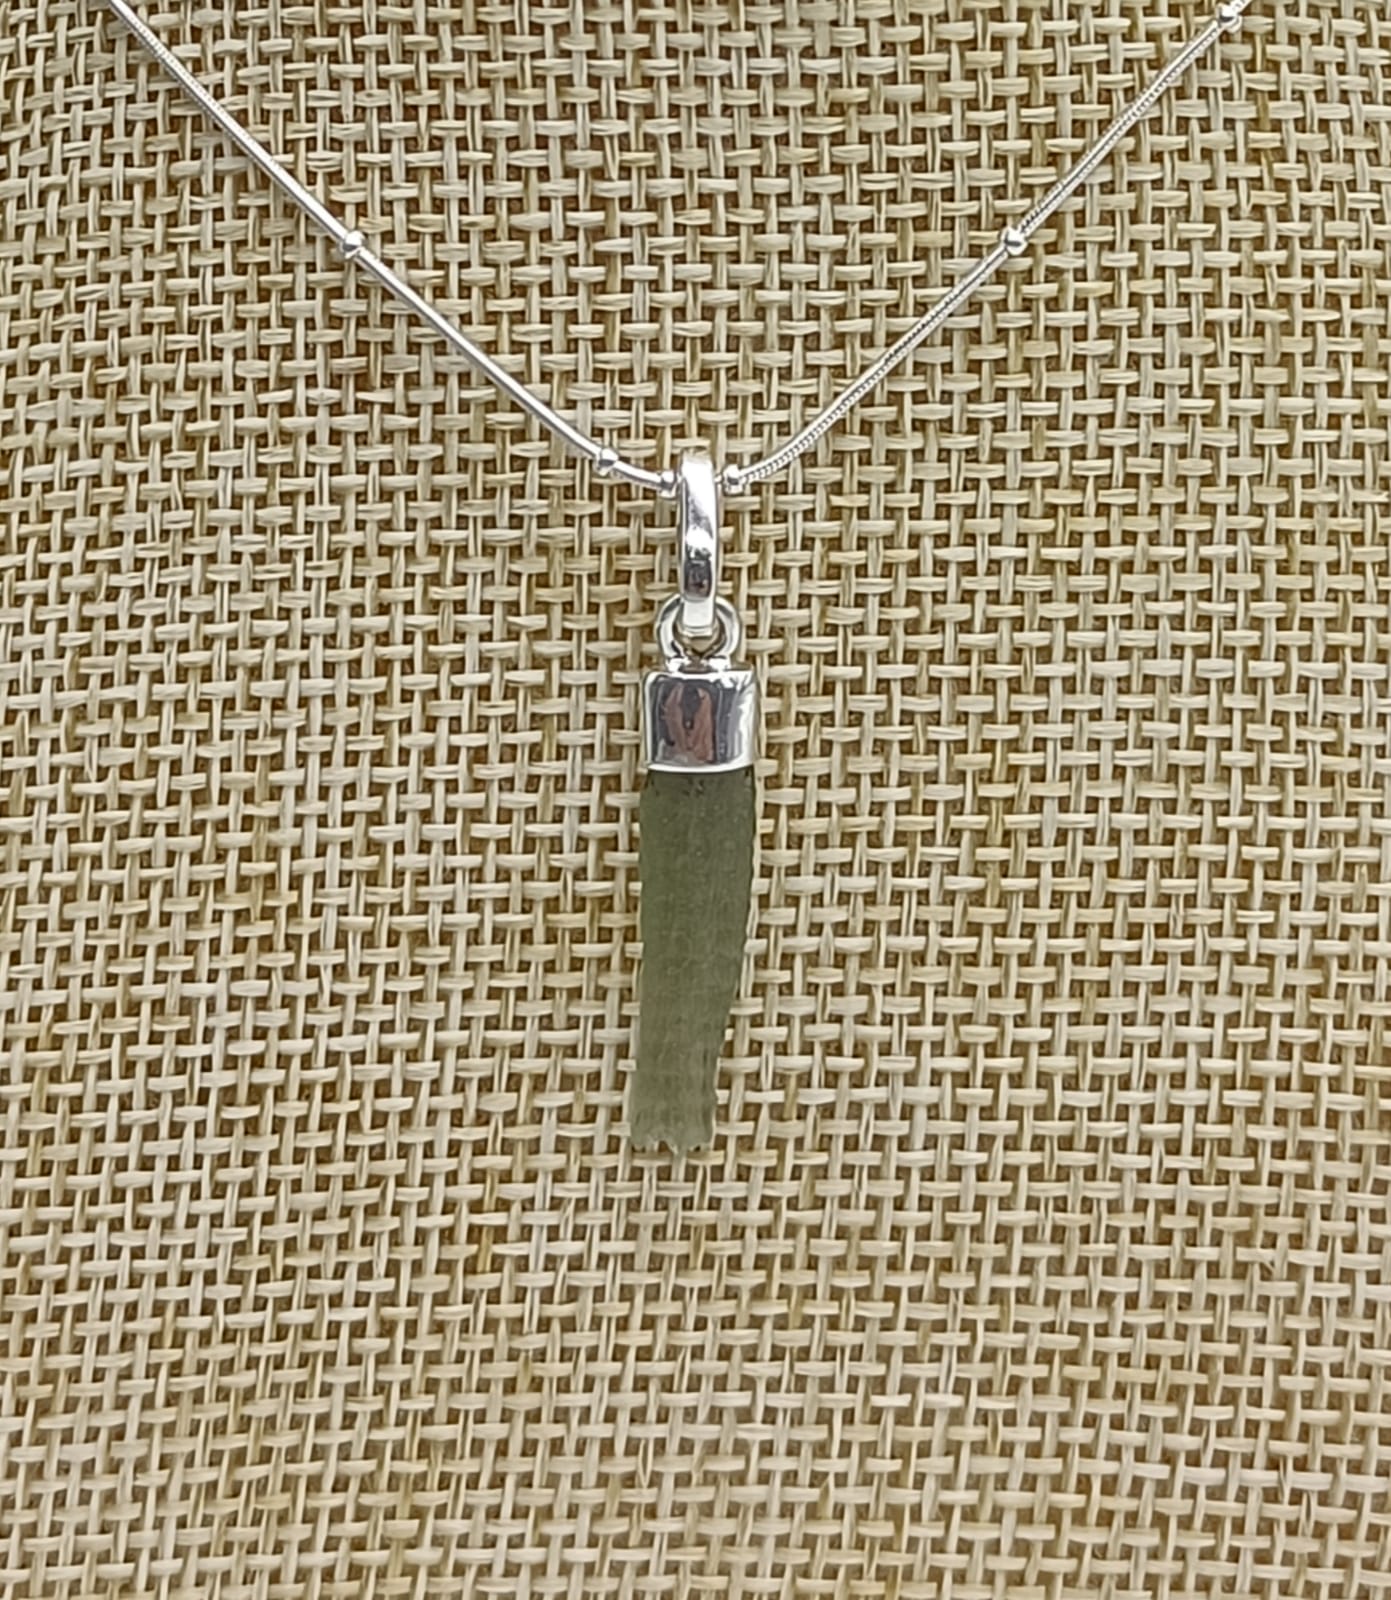 1.2g Authentic Moldavite 925 Silver Pendant 24x5mm (Silver Chain Included) Crystal Wellness